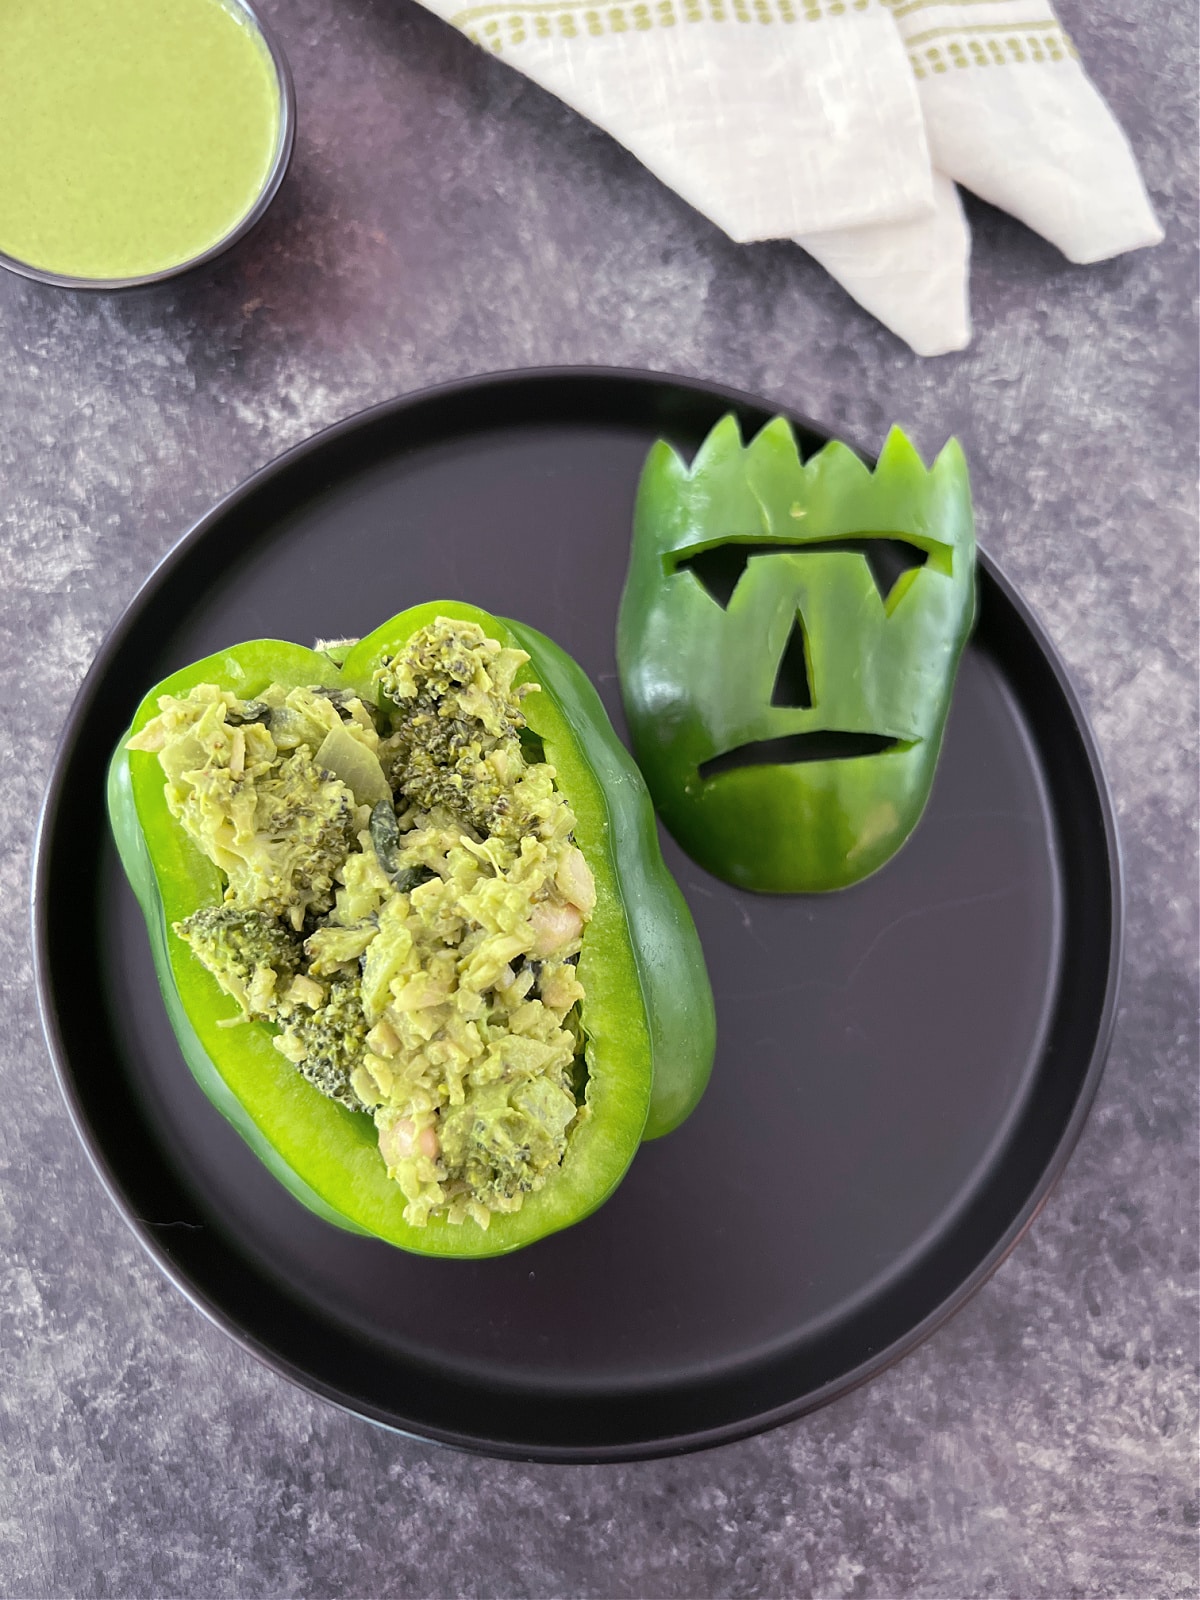 Overhead view of a green bell pepper that has been carved with a Frankenstein monster face and is stuffed with a green goddess sauce and vegetable mixture. The monster face is removed and sits on the black plate next to the pepper, which shows the green veggie stuffing inside.